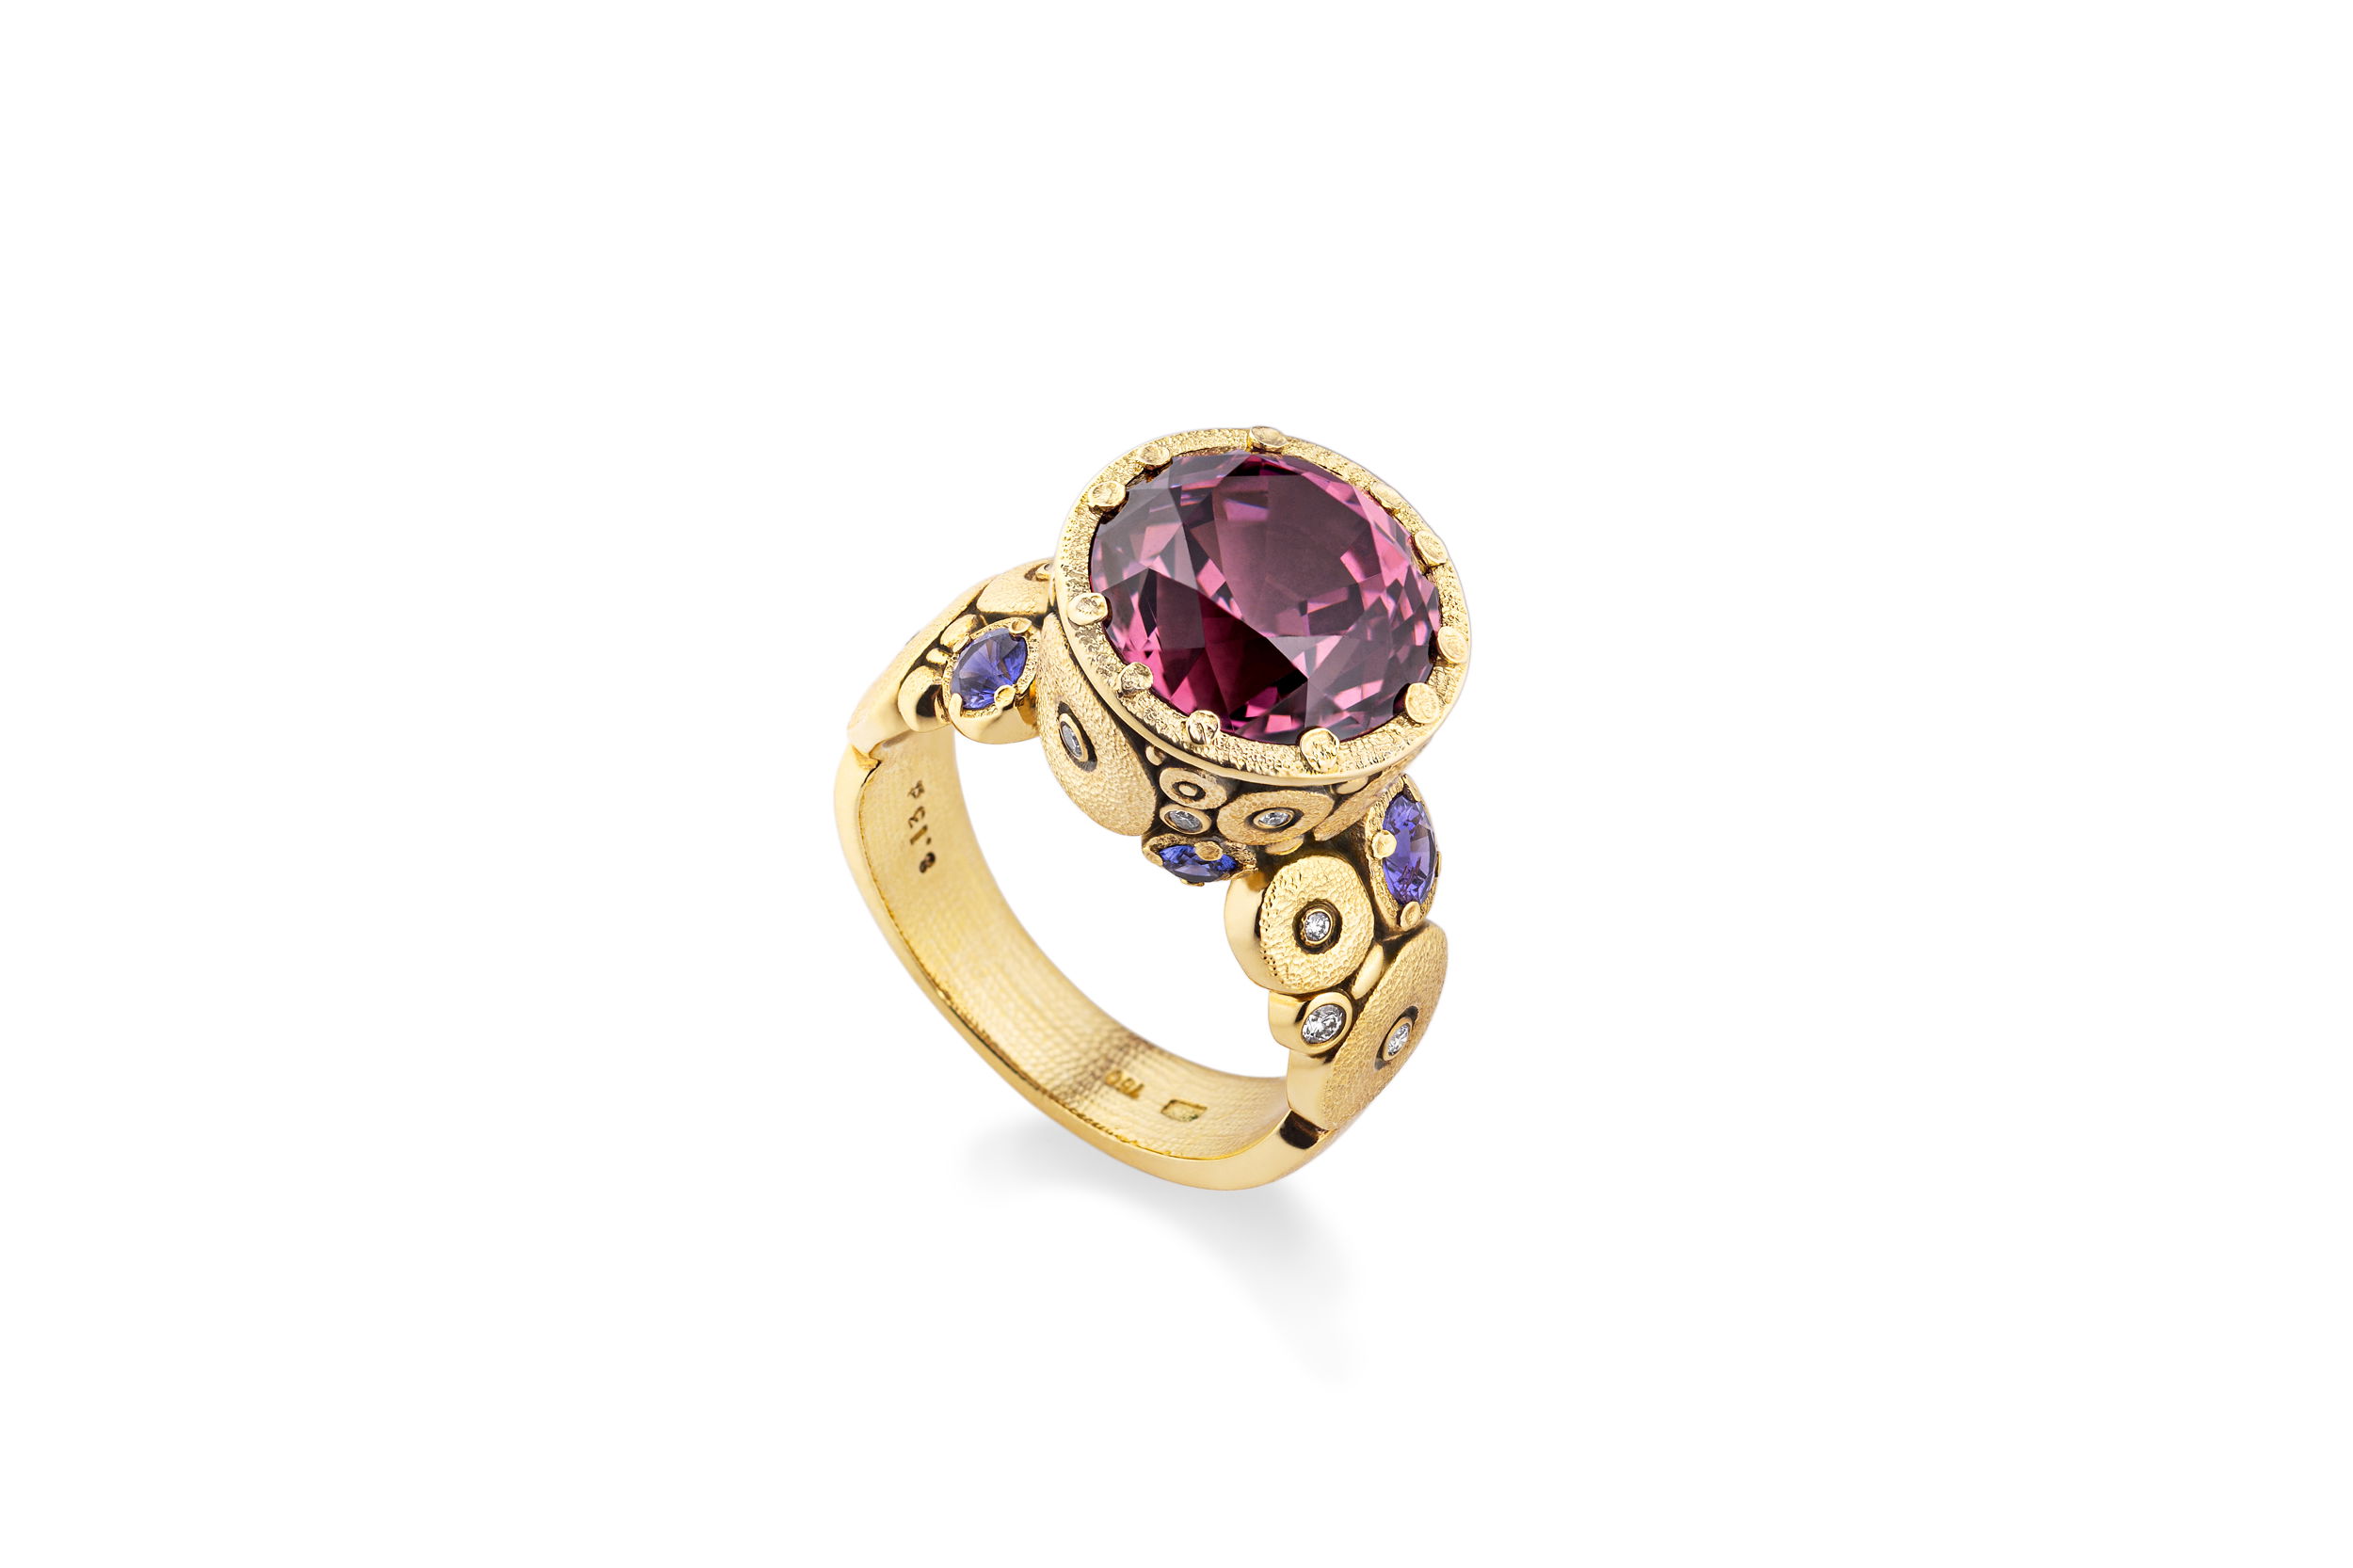 Orchard Ring Mounting with 8.13ct Malaya Garnet and Sapphire Band in 18kt Yellow Gold